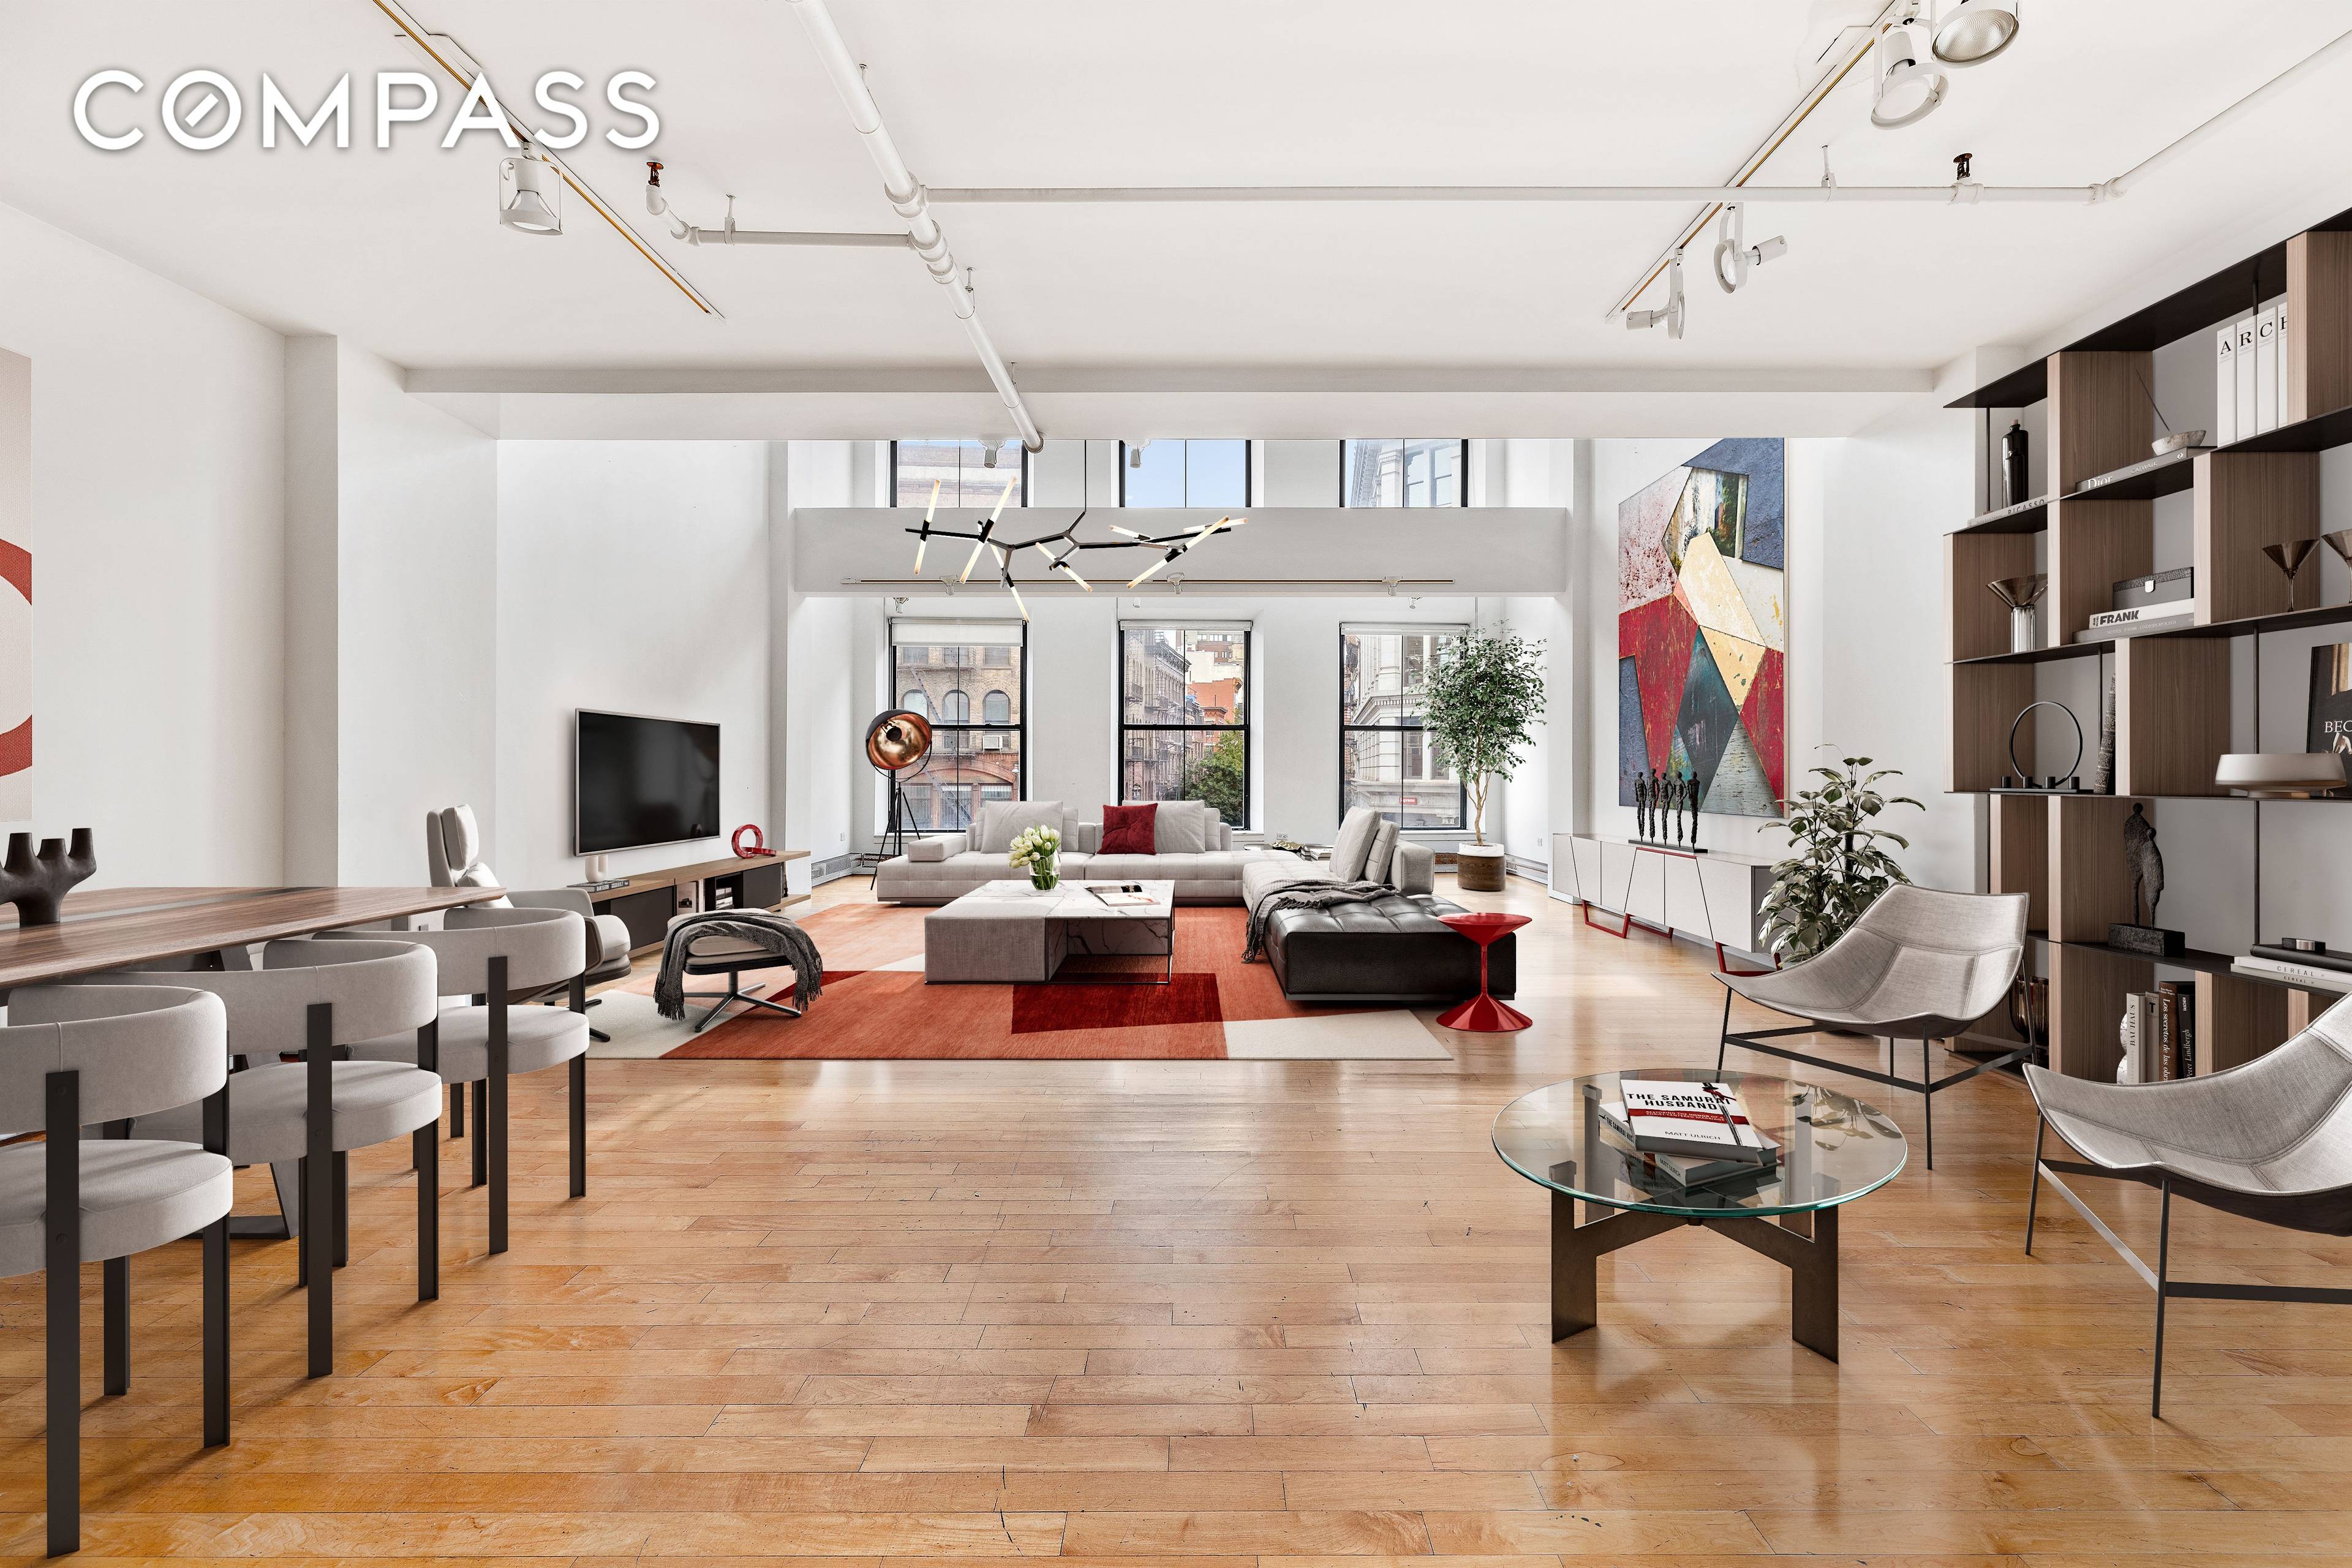 Rare opportunity to own a 3 bedroom duplex in the heart of the Soho and Lower East Side gallery district.